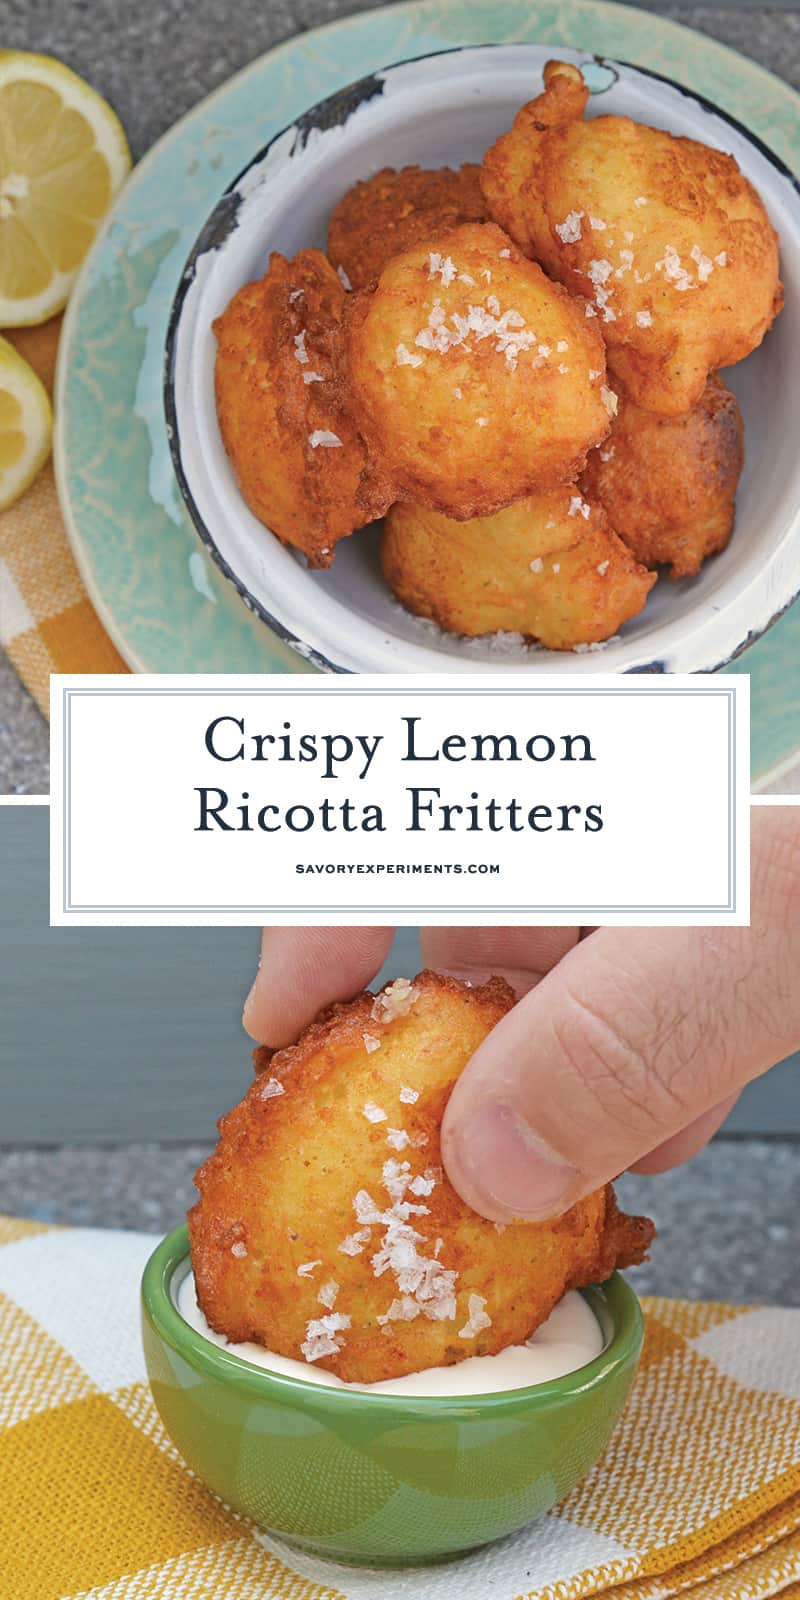 Lemon Ricotta Fritters are a savory fritter recipe. Smooth and rich, they are filled with cheese and a subtle lemon and sage. Served with garlic aioli! #frittersrecipe #ricottafritter www.savoryexperiments.com